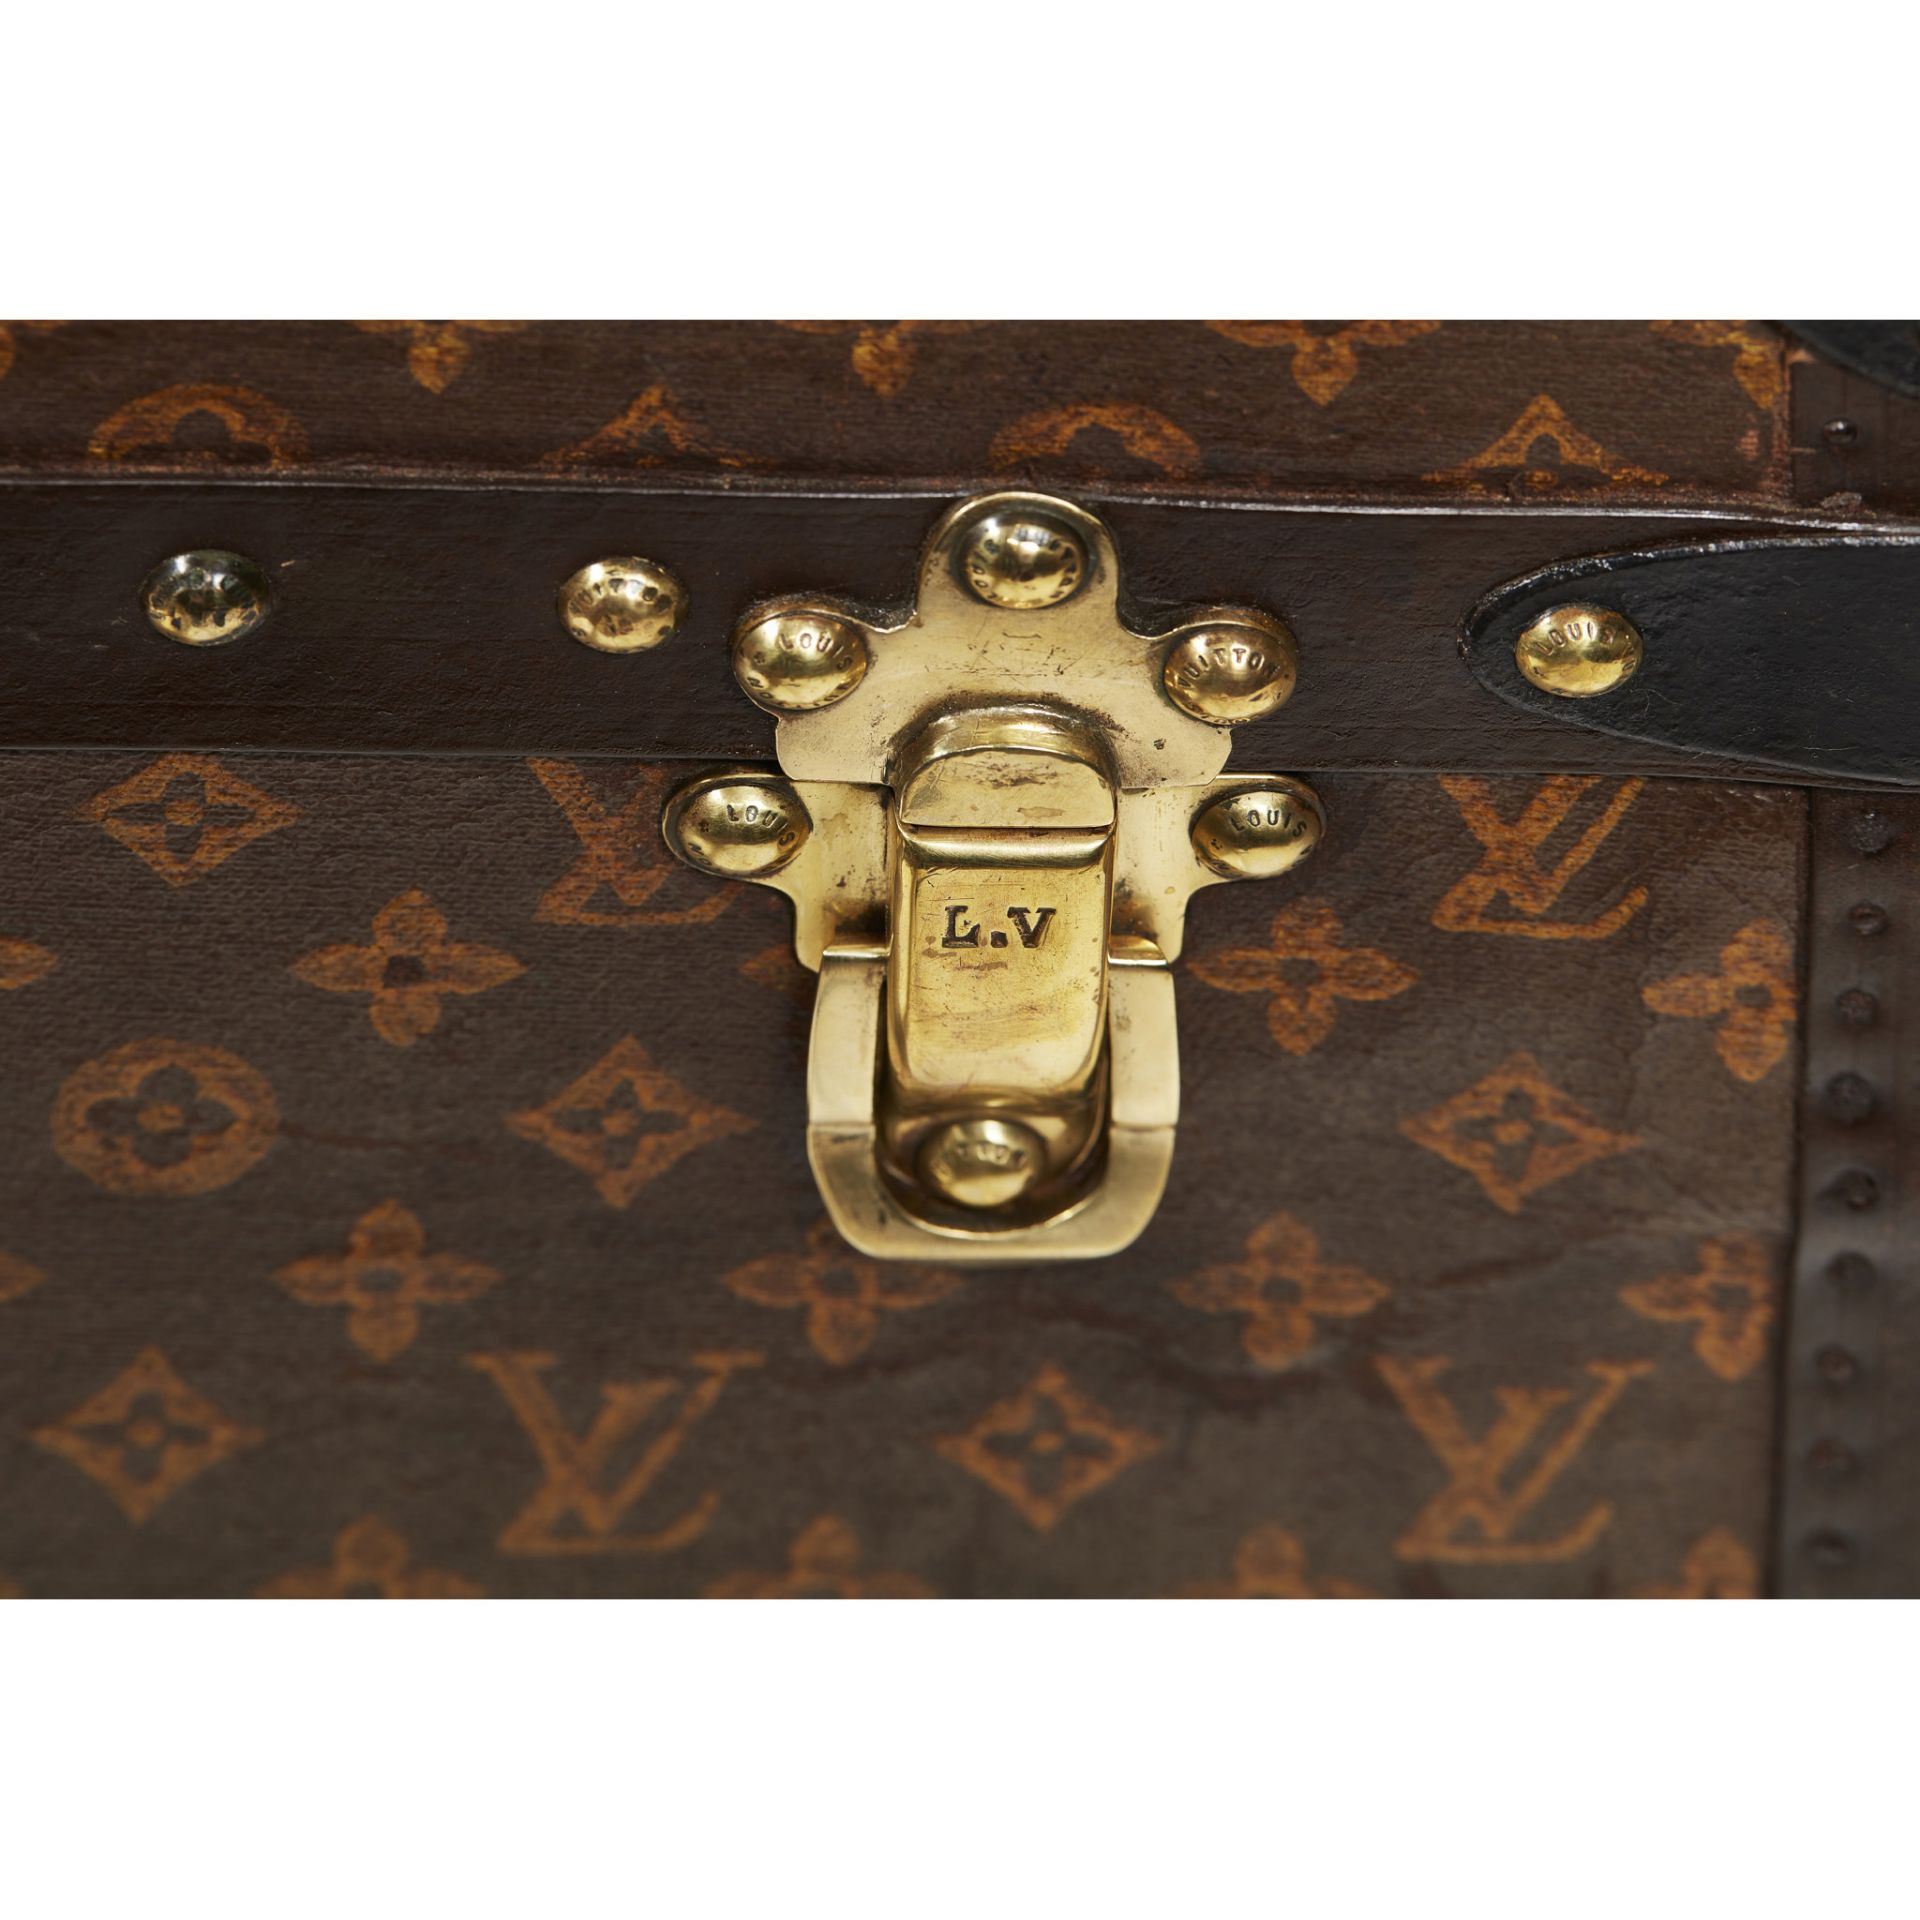 LOUIS VUITTON LARGE TRUNK EARLY 20TH CENTURY - Image 3 of 3